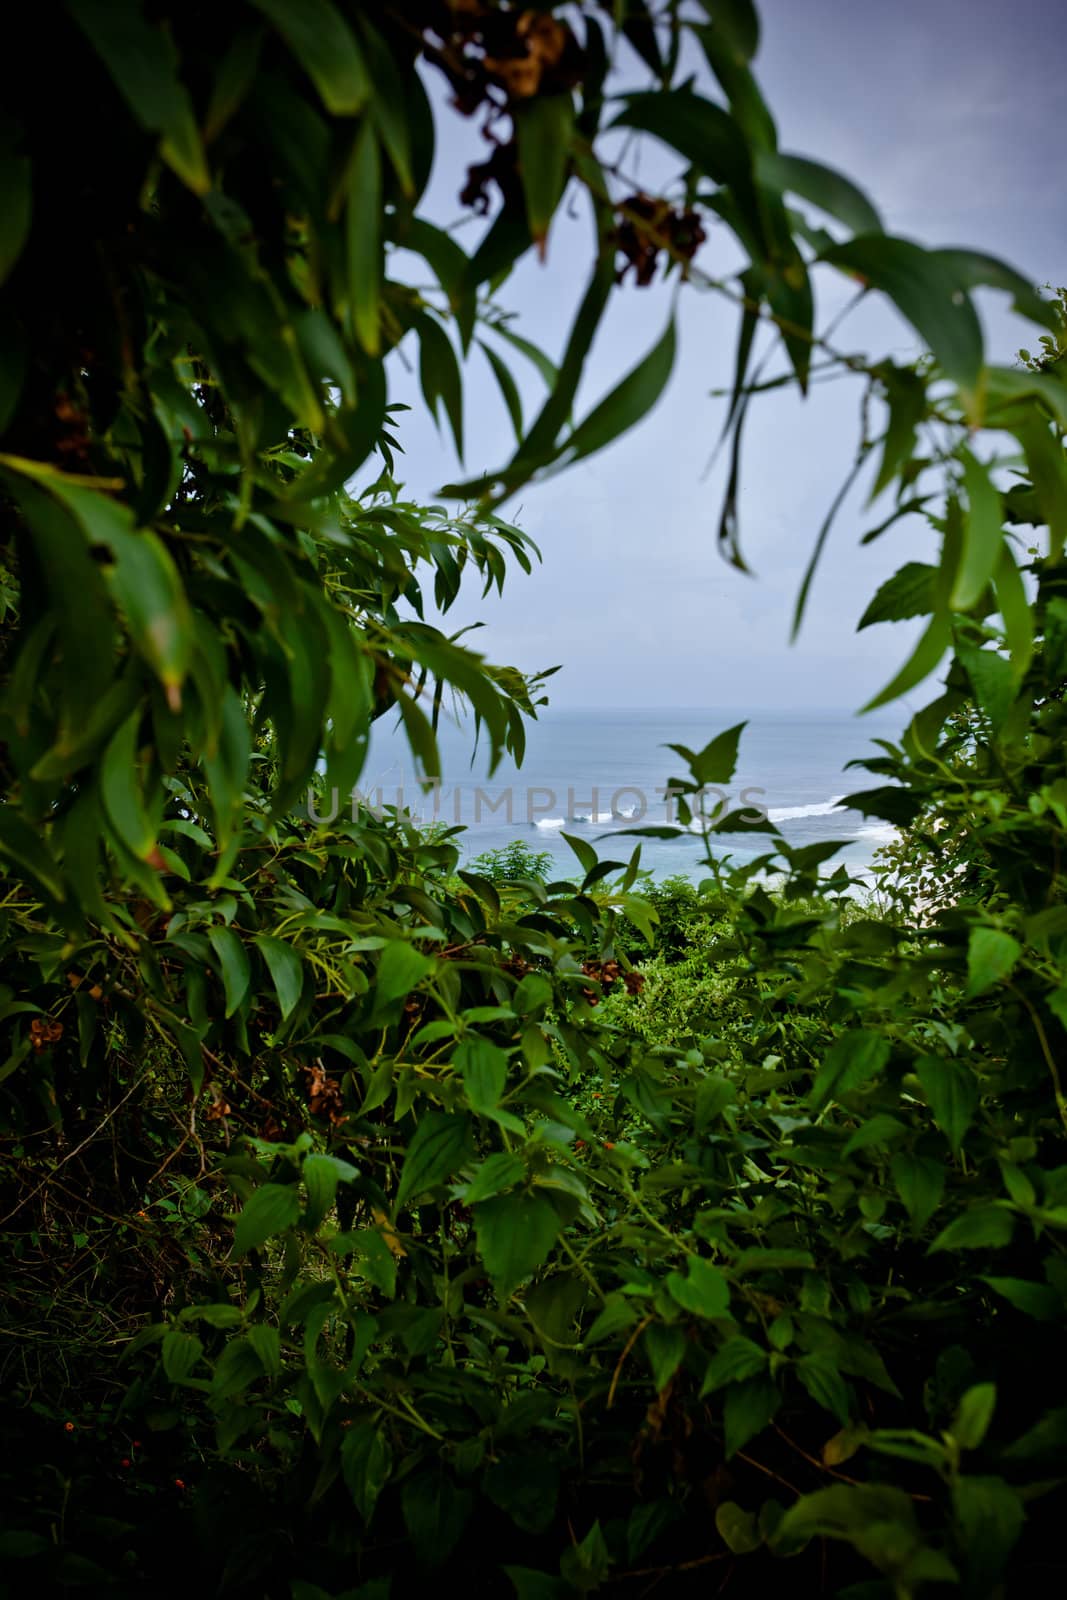 Ocean view through through a gap in lush tropical greenery and leaves for a fresh natural background